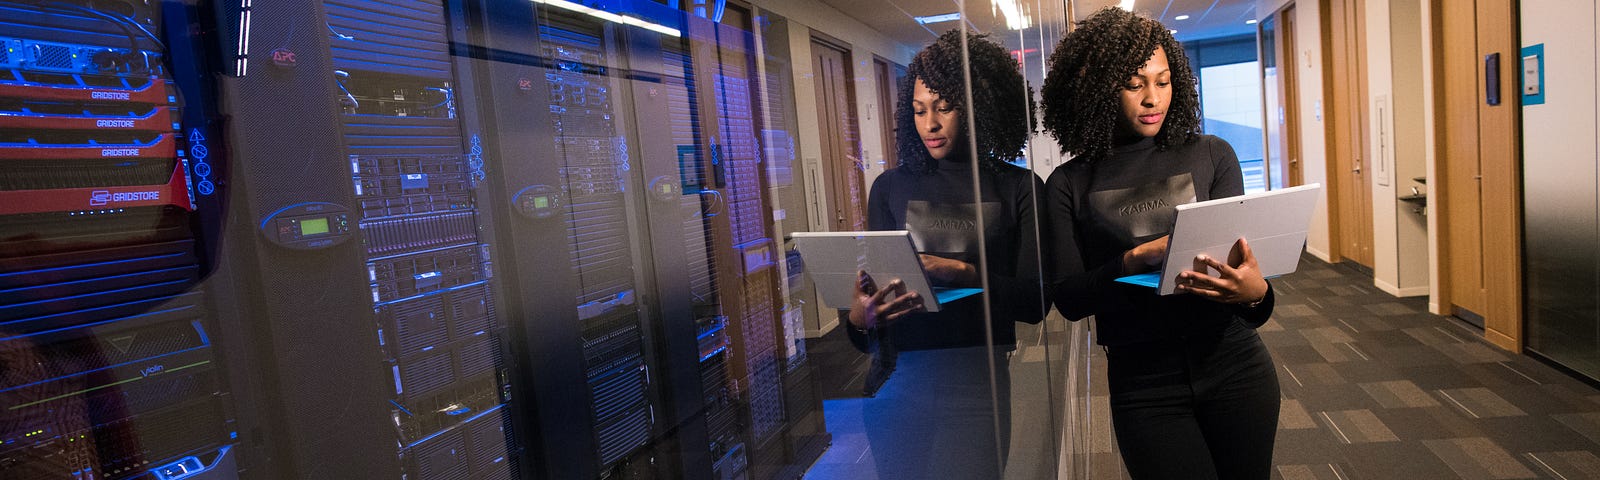 woman looking at a laptop in her hands standing next to a glass-walled room full of what appears to be computer racks